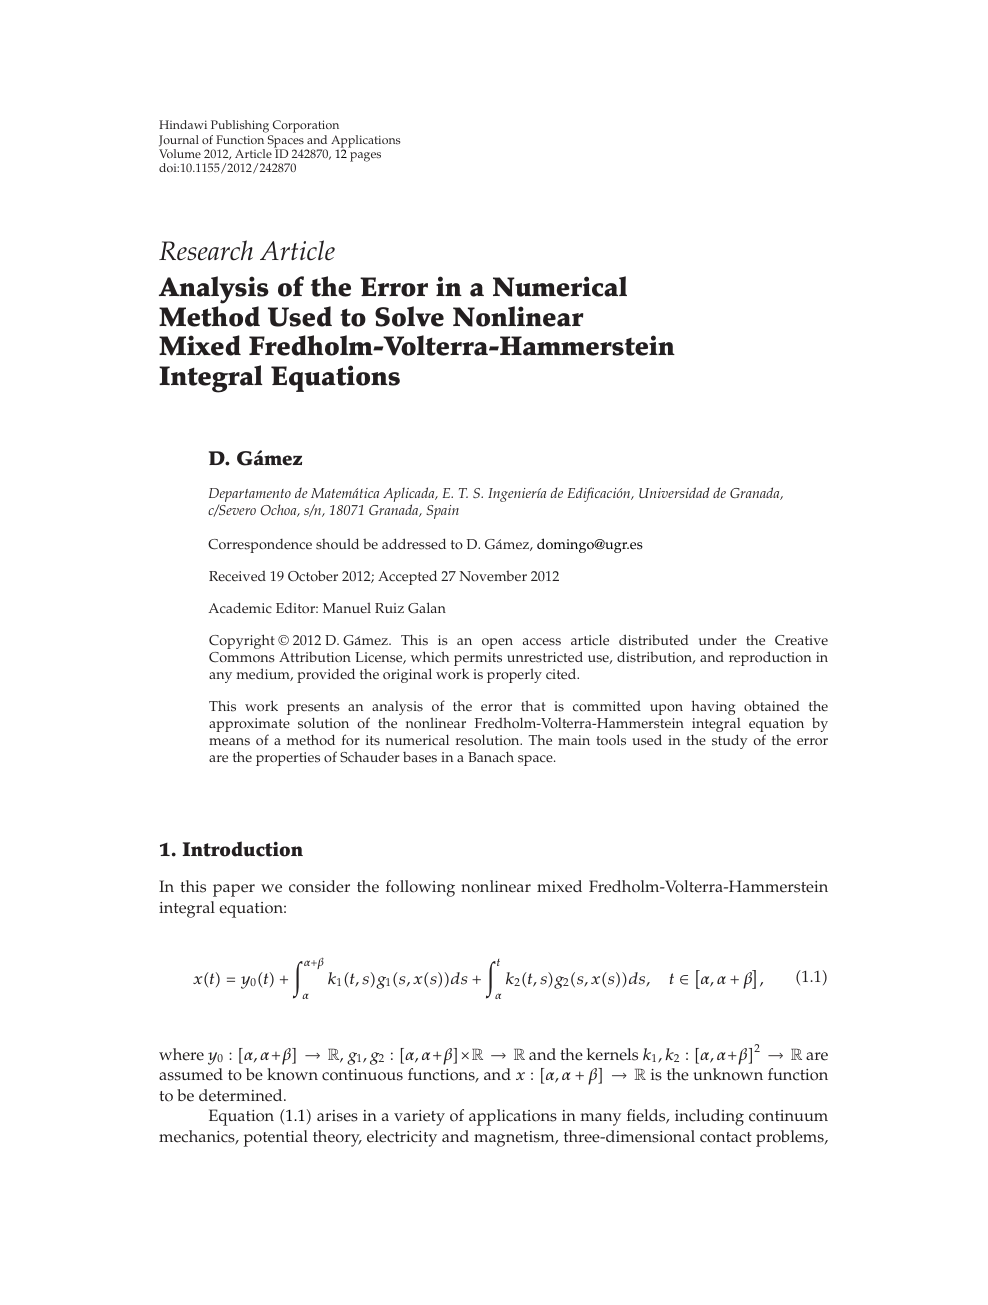 Analysis Of The Error In A Numerical Method Used To Solve Nonlinear Mixed Fredholm Volterra Hammerstein Integral Equations Topic Of Research Paper In Mathematics Download Scholarly Article Pdf And Read For Free On